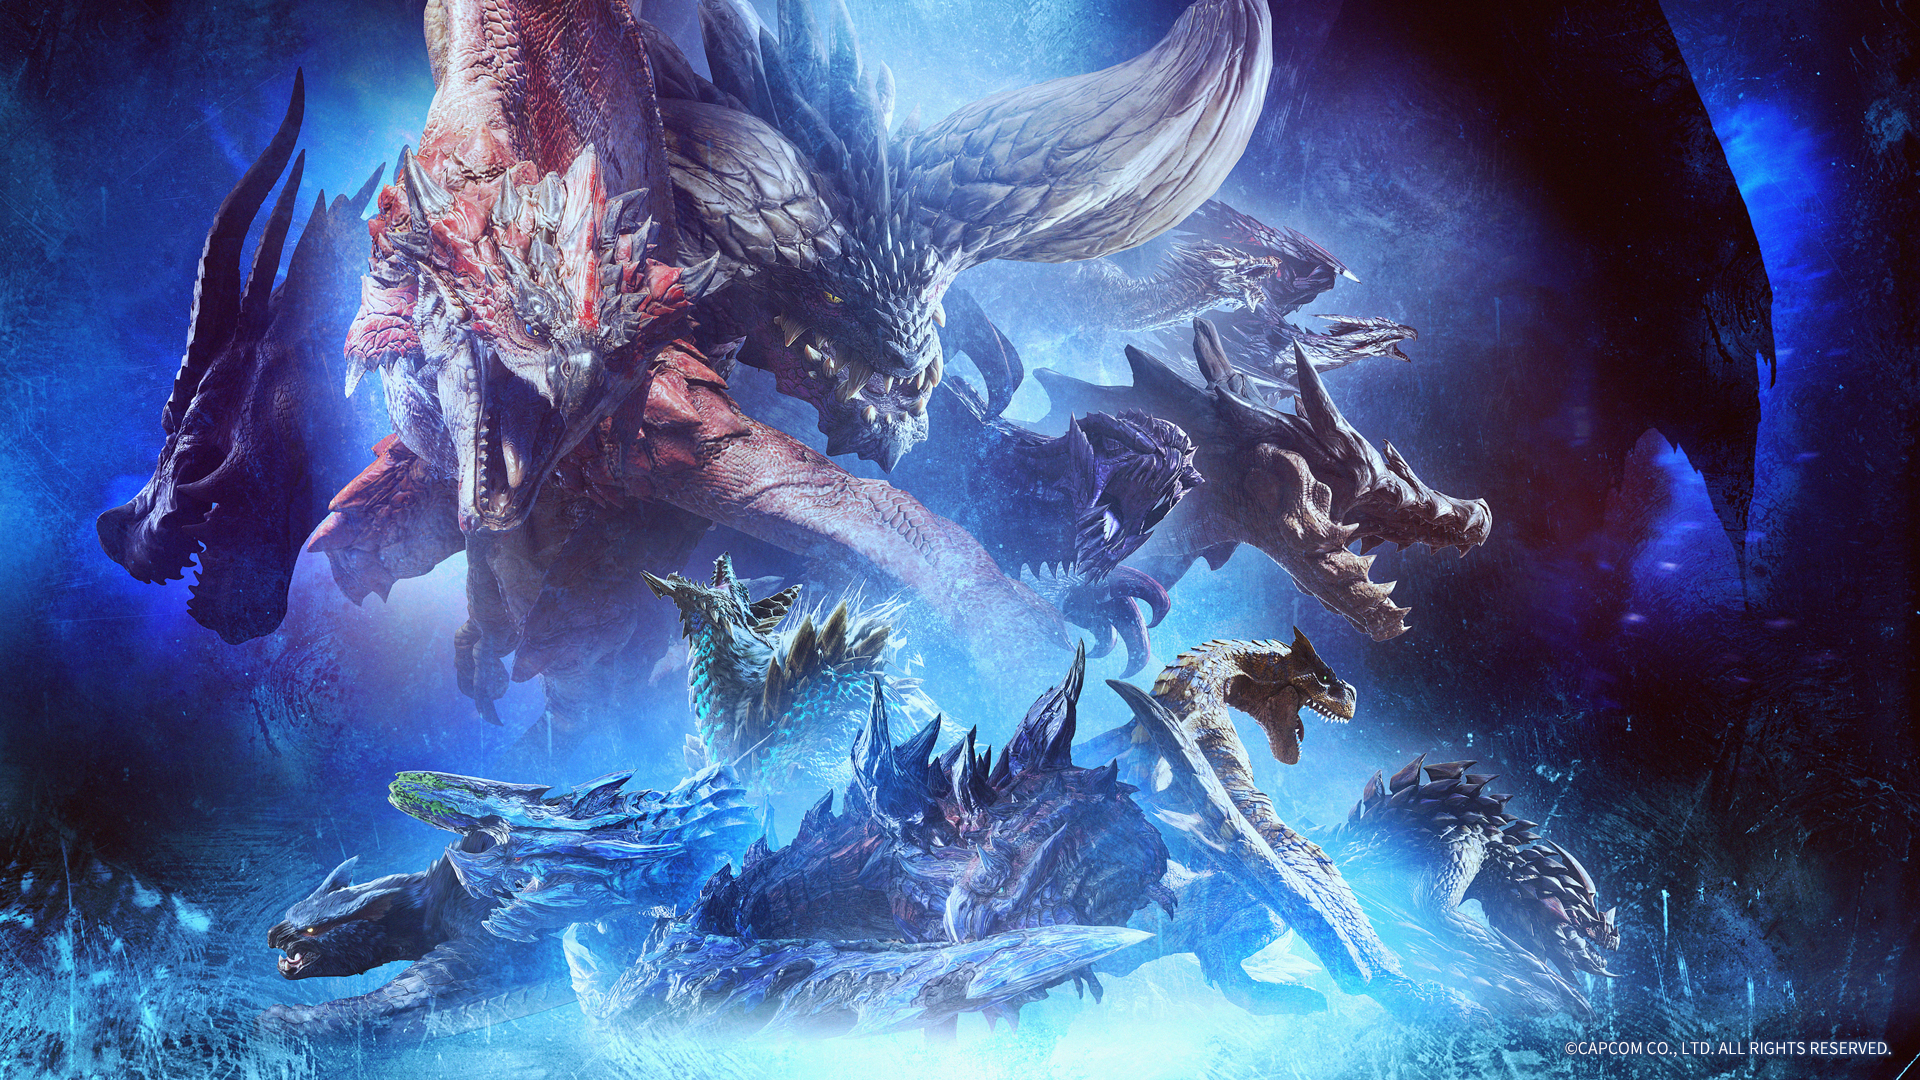 Mh 15th Anniversary Official Key Art Featuring Fan Favorite